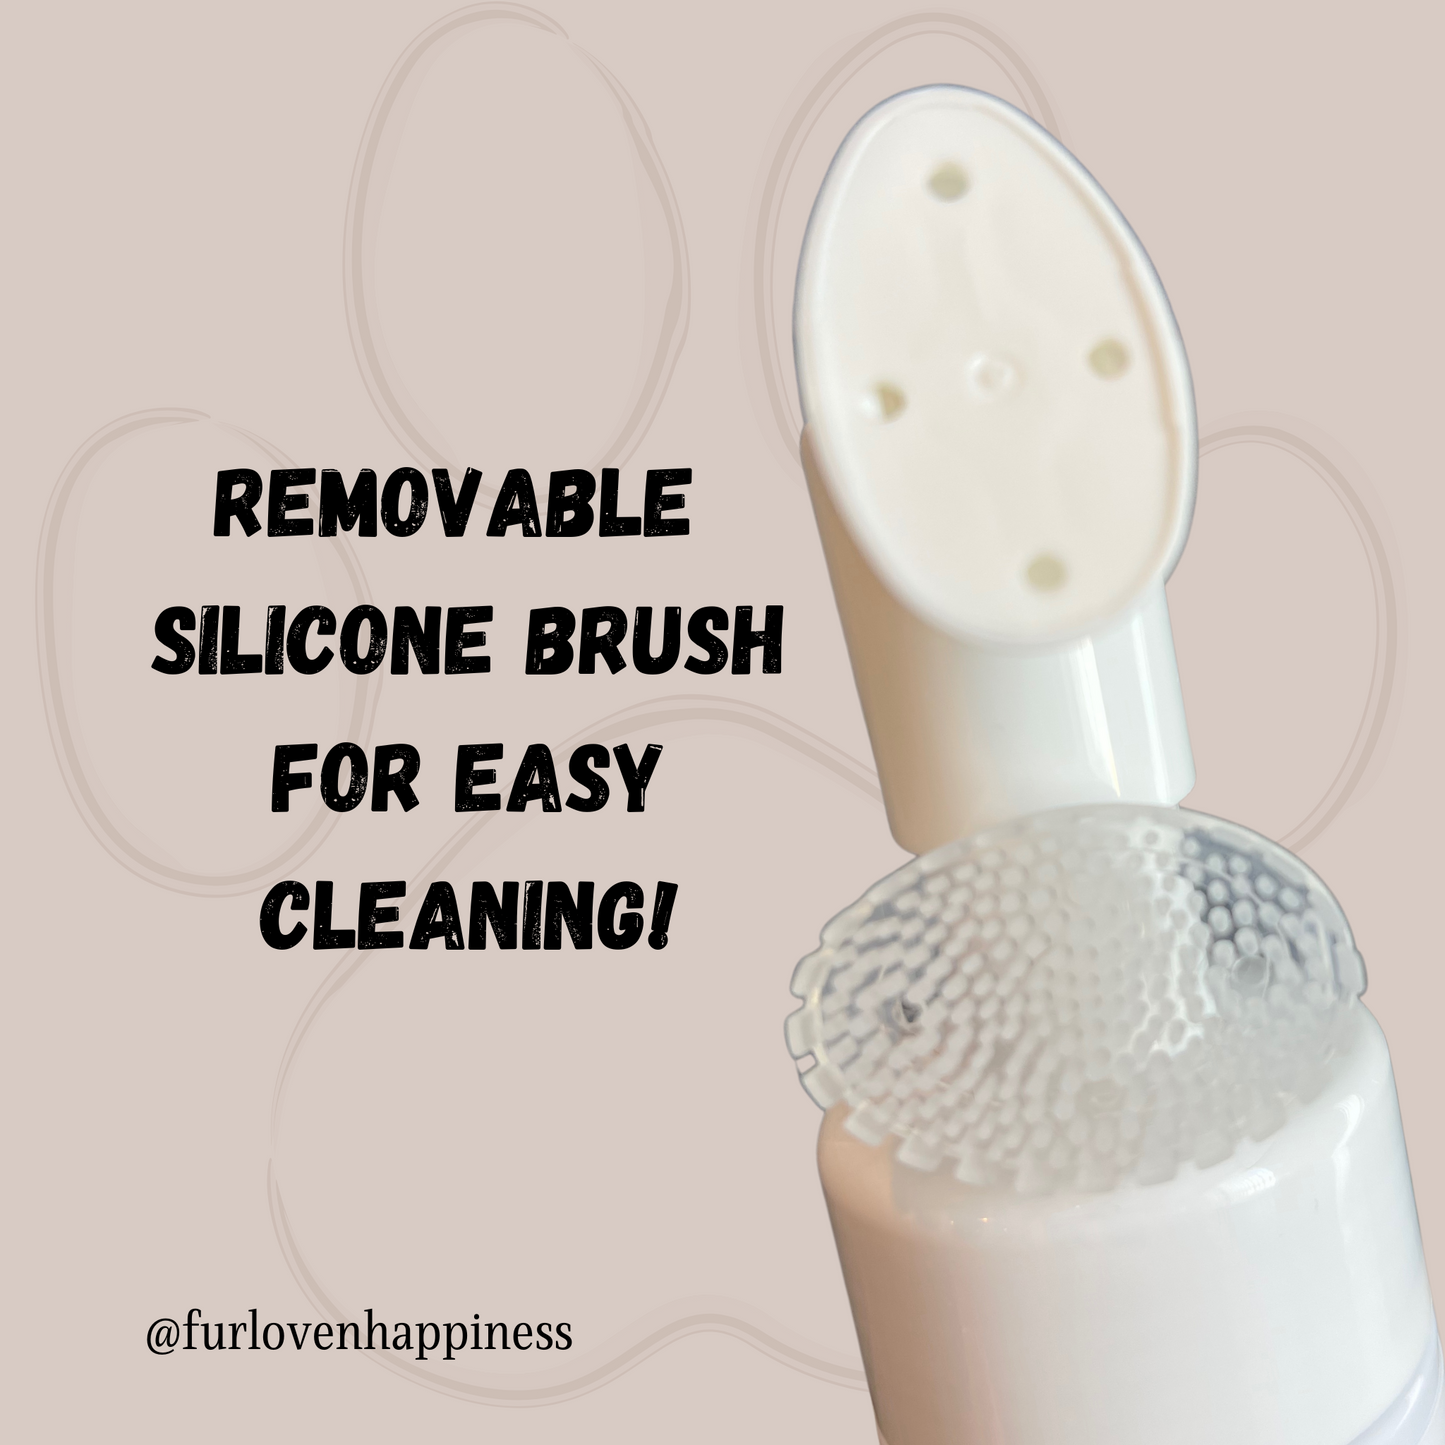 Removable silicone brush for easy cleaning